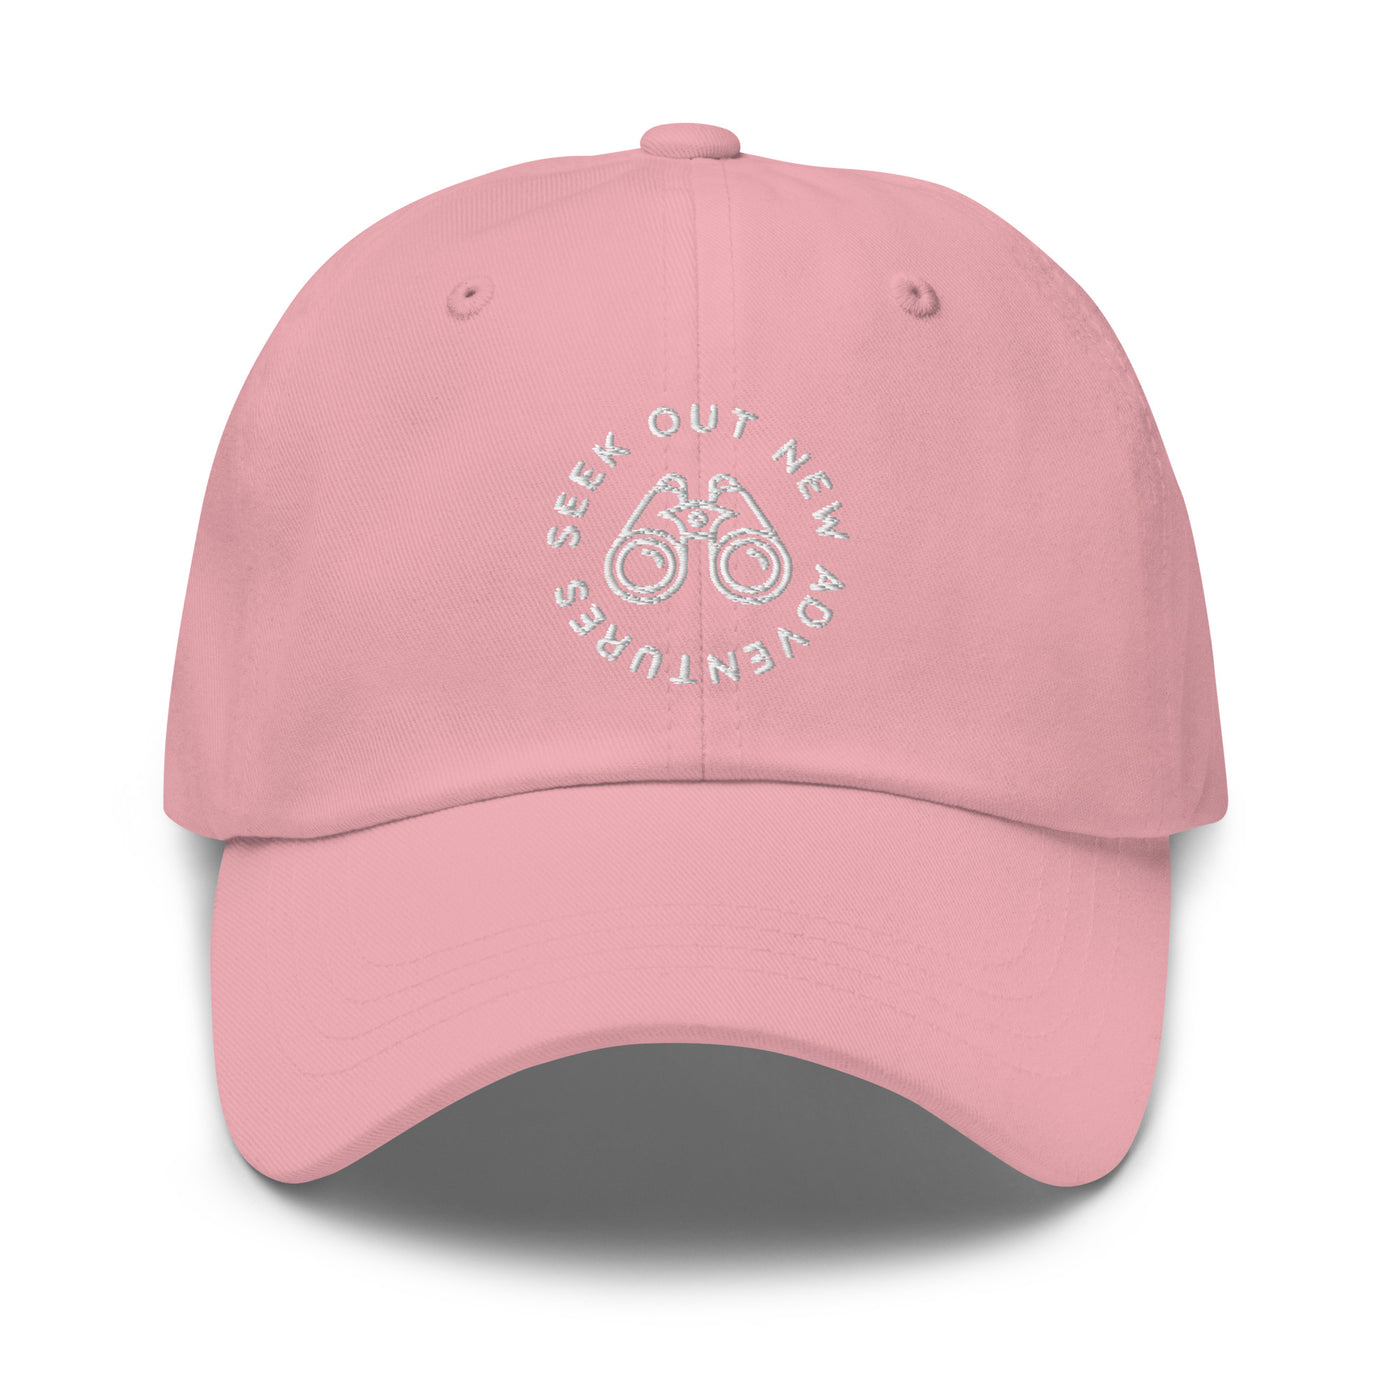 Seek Out New Adventures Embroidered Hat